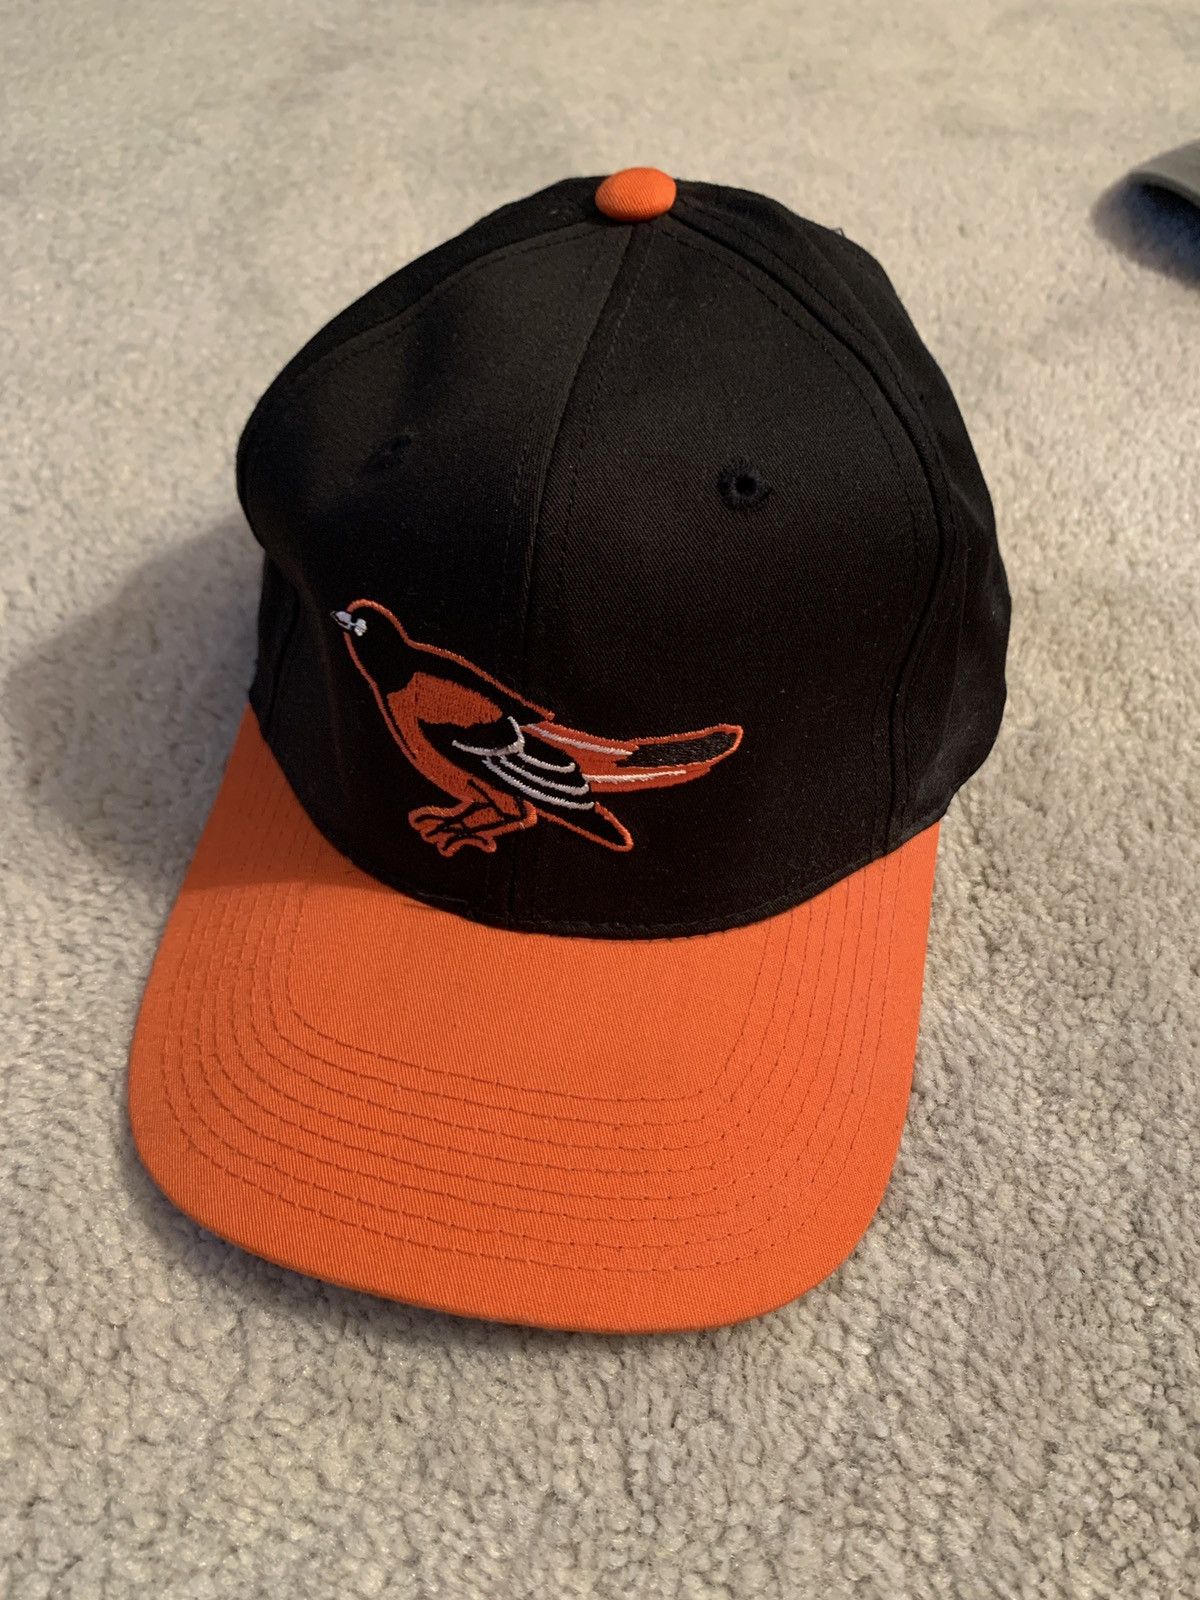 MLB Vintage Baltimore Orioles Baseball Hat Size ONE SIZE - 1 Preview